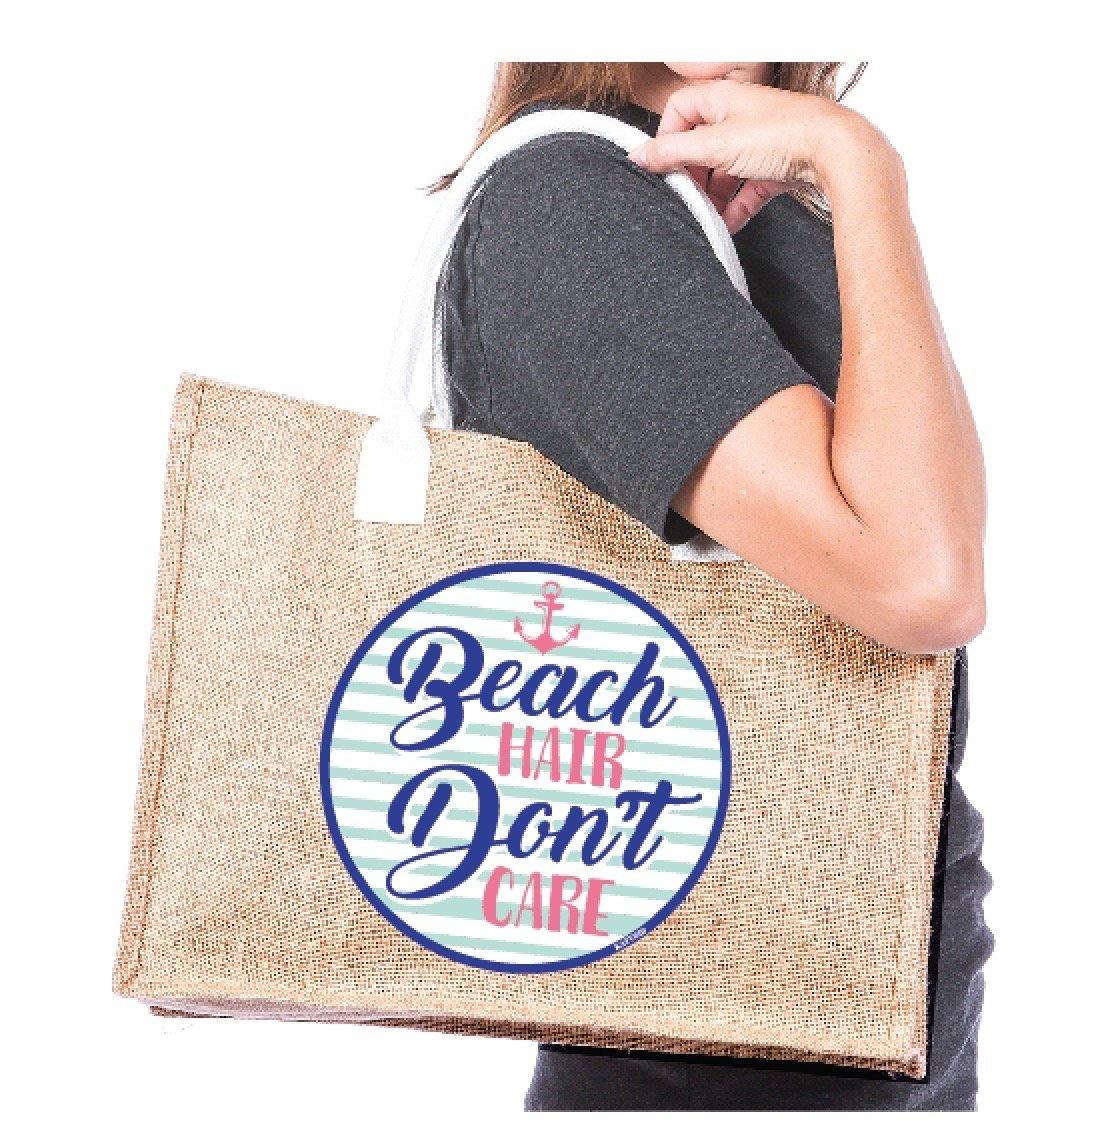 Beach tote • Beach hair don’t care. - Stacy's Pink Martini Boutique